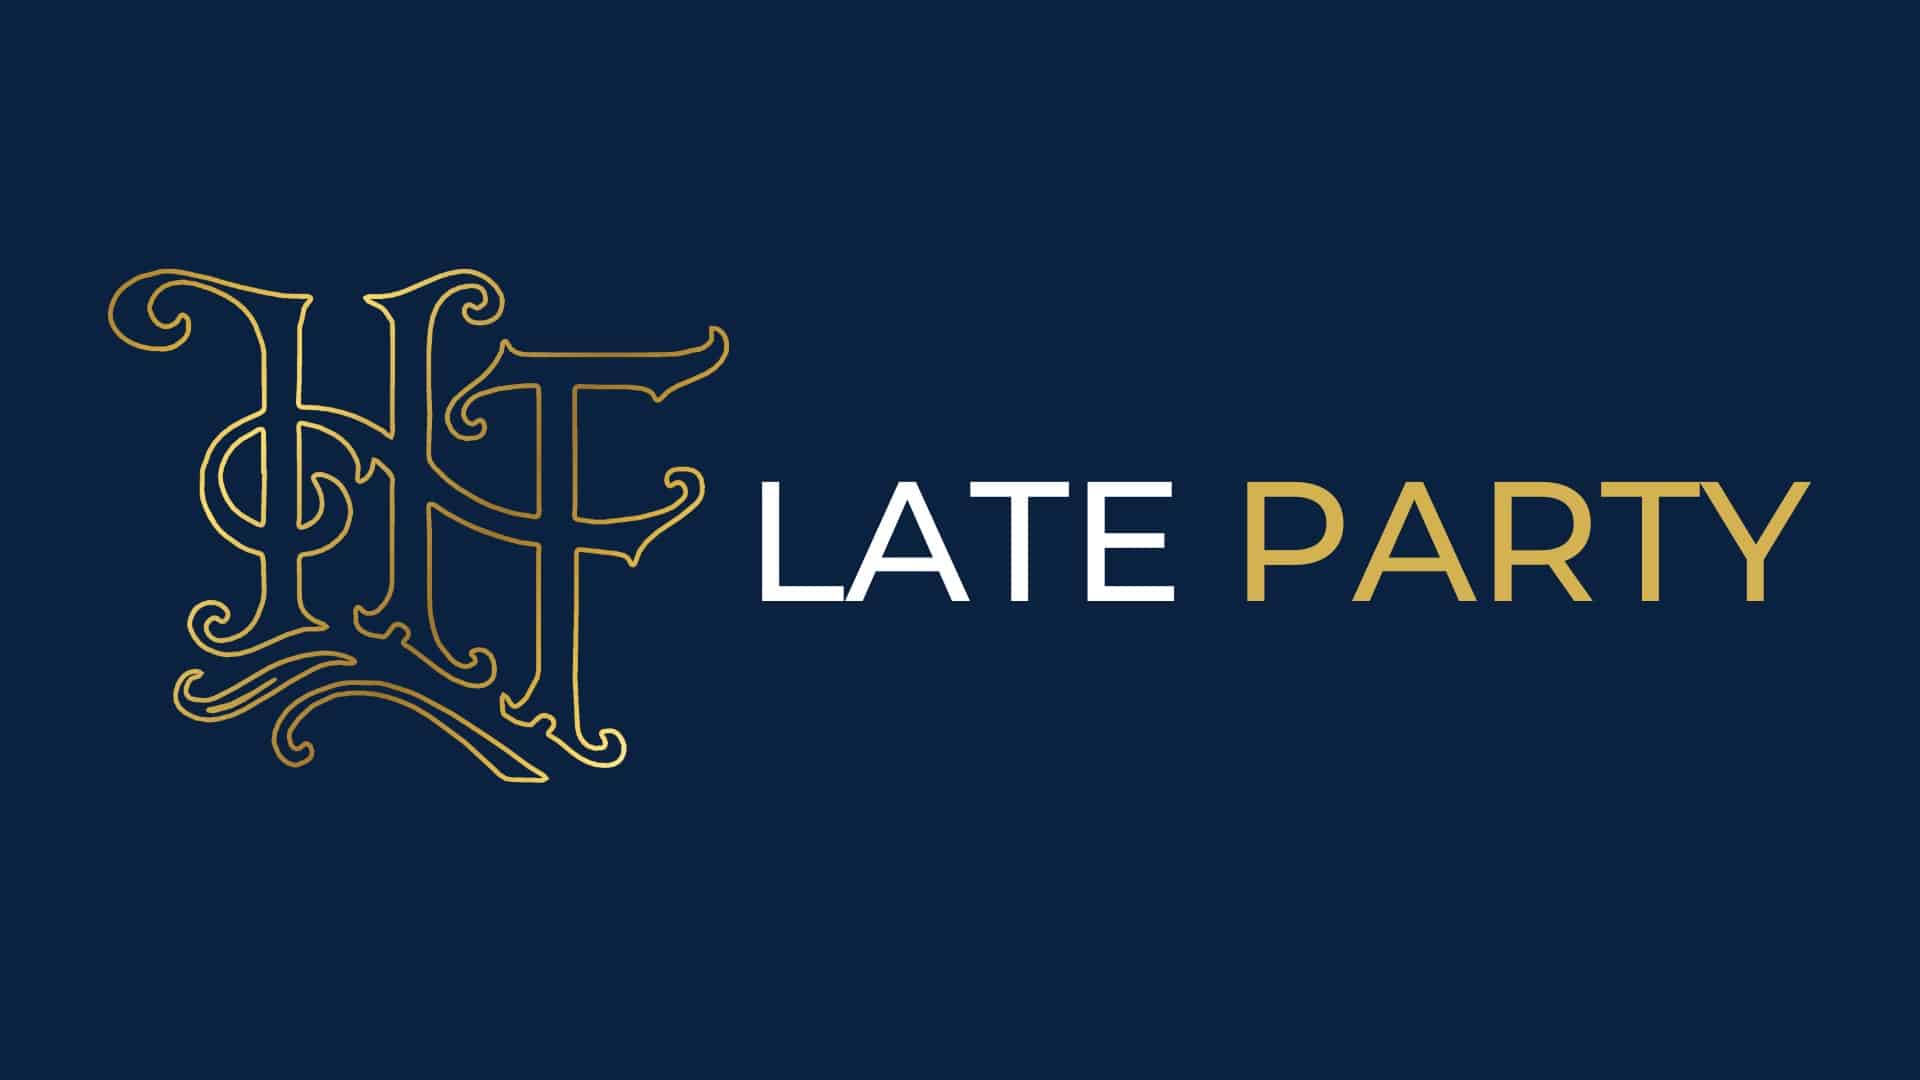 Heritage Ball Late Party Franklin, Tennessee_logo.